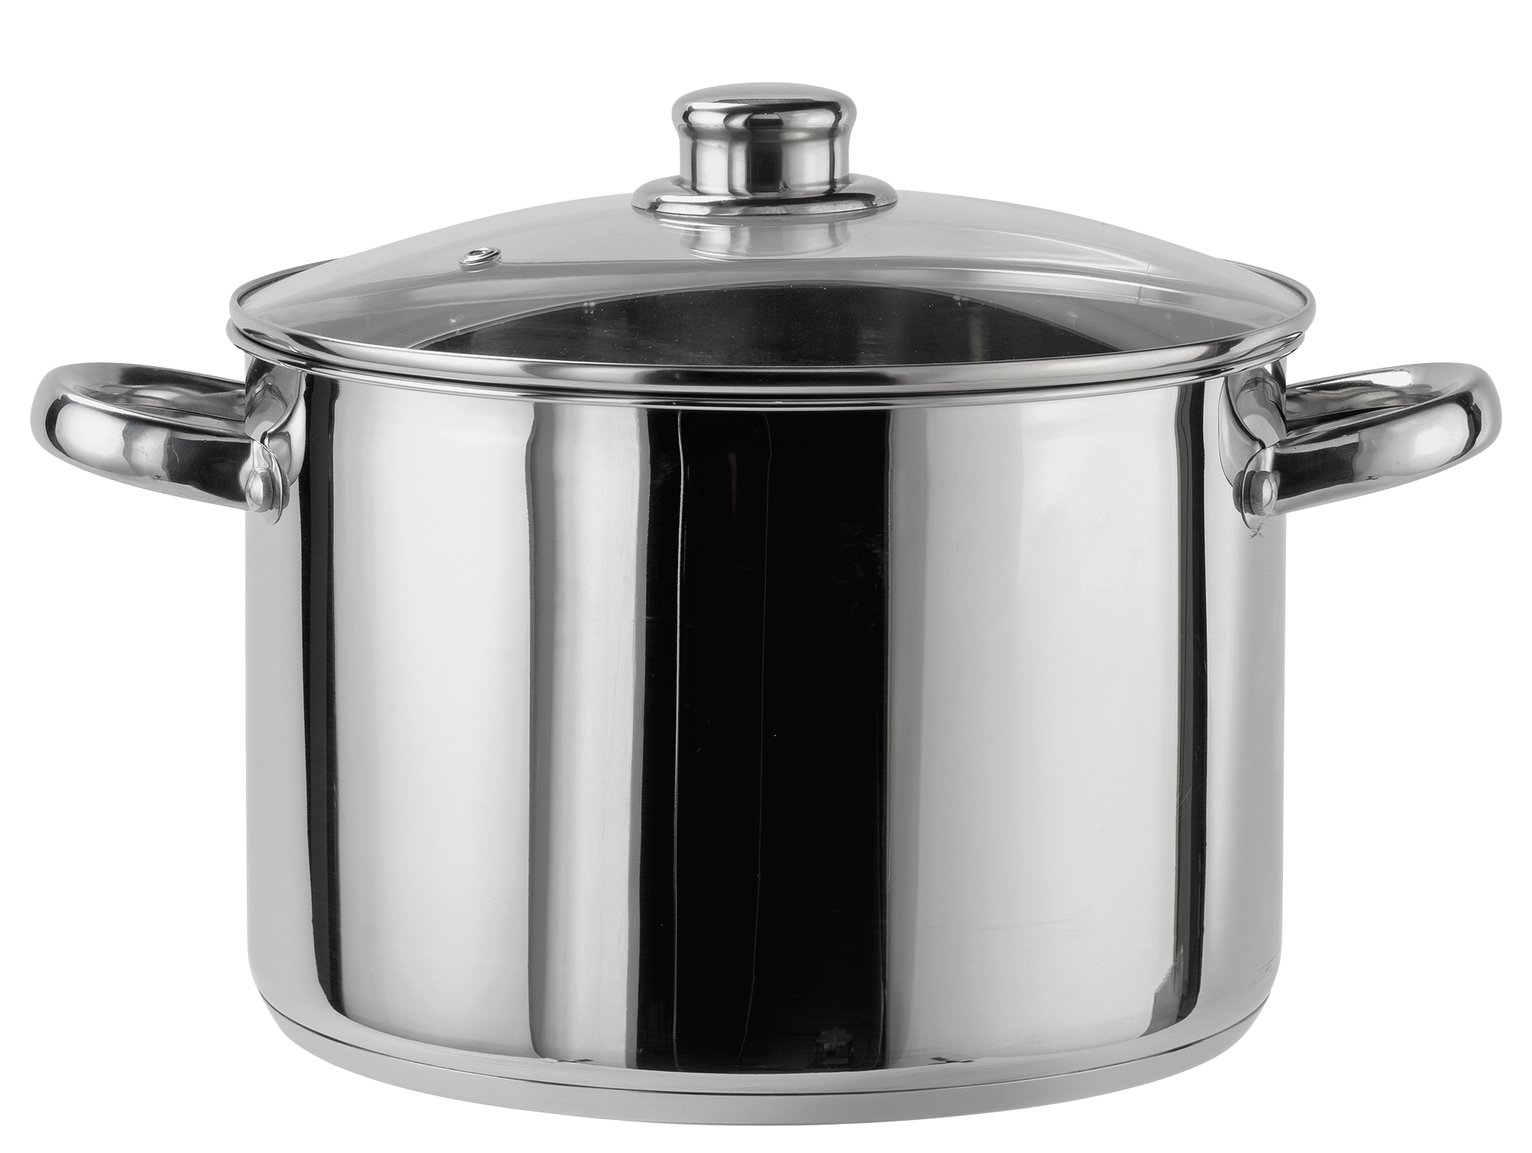 Argos Home 24cm Stainless Steel Stock Pot review